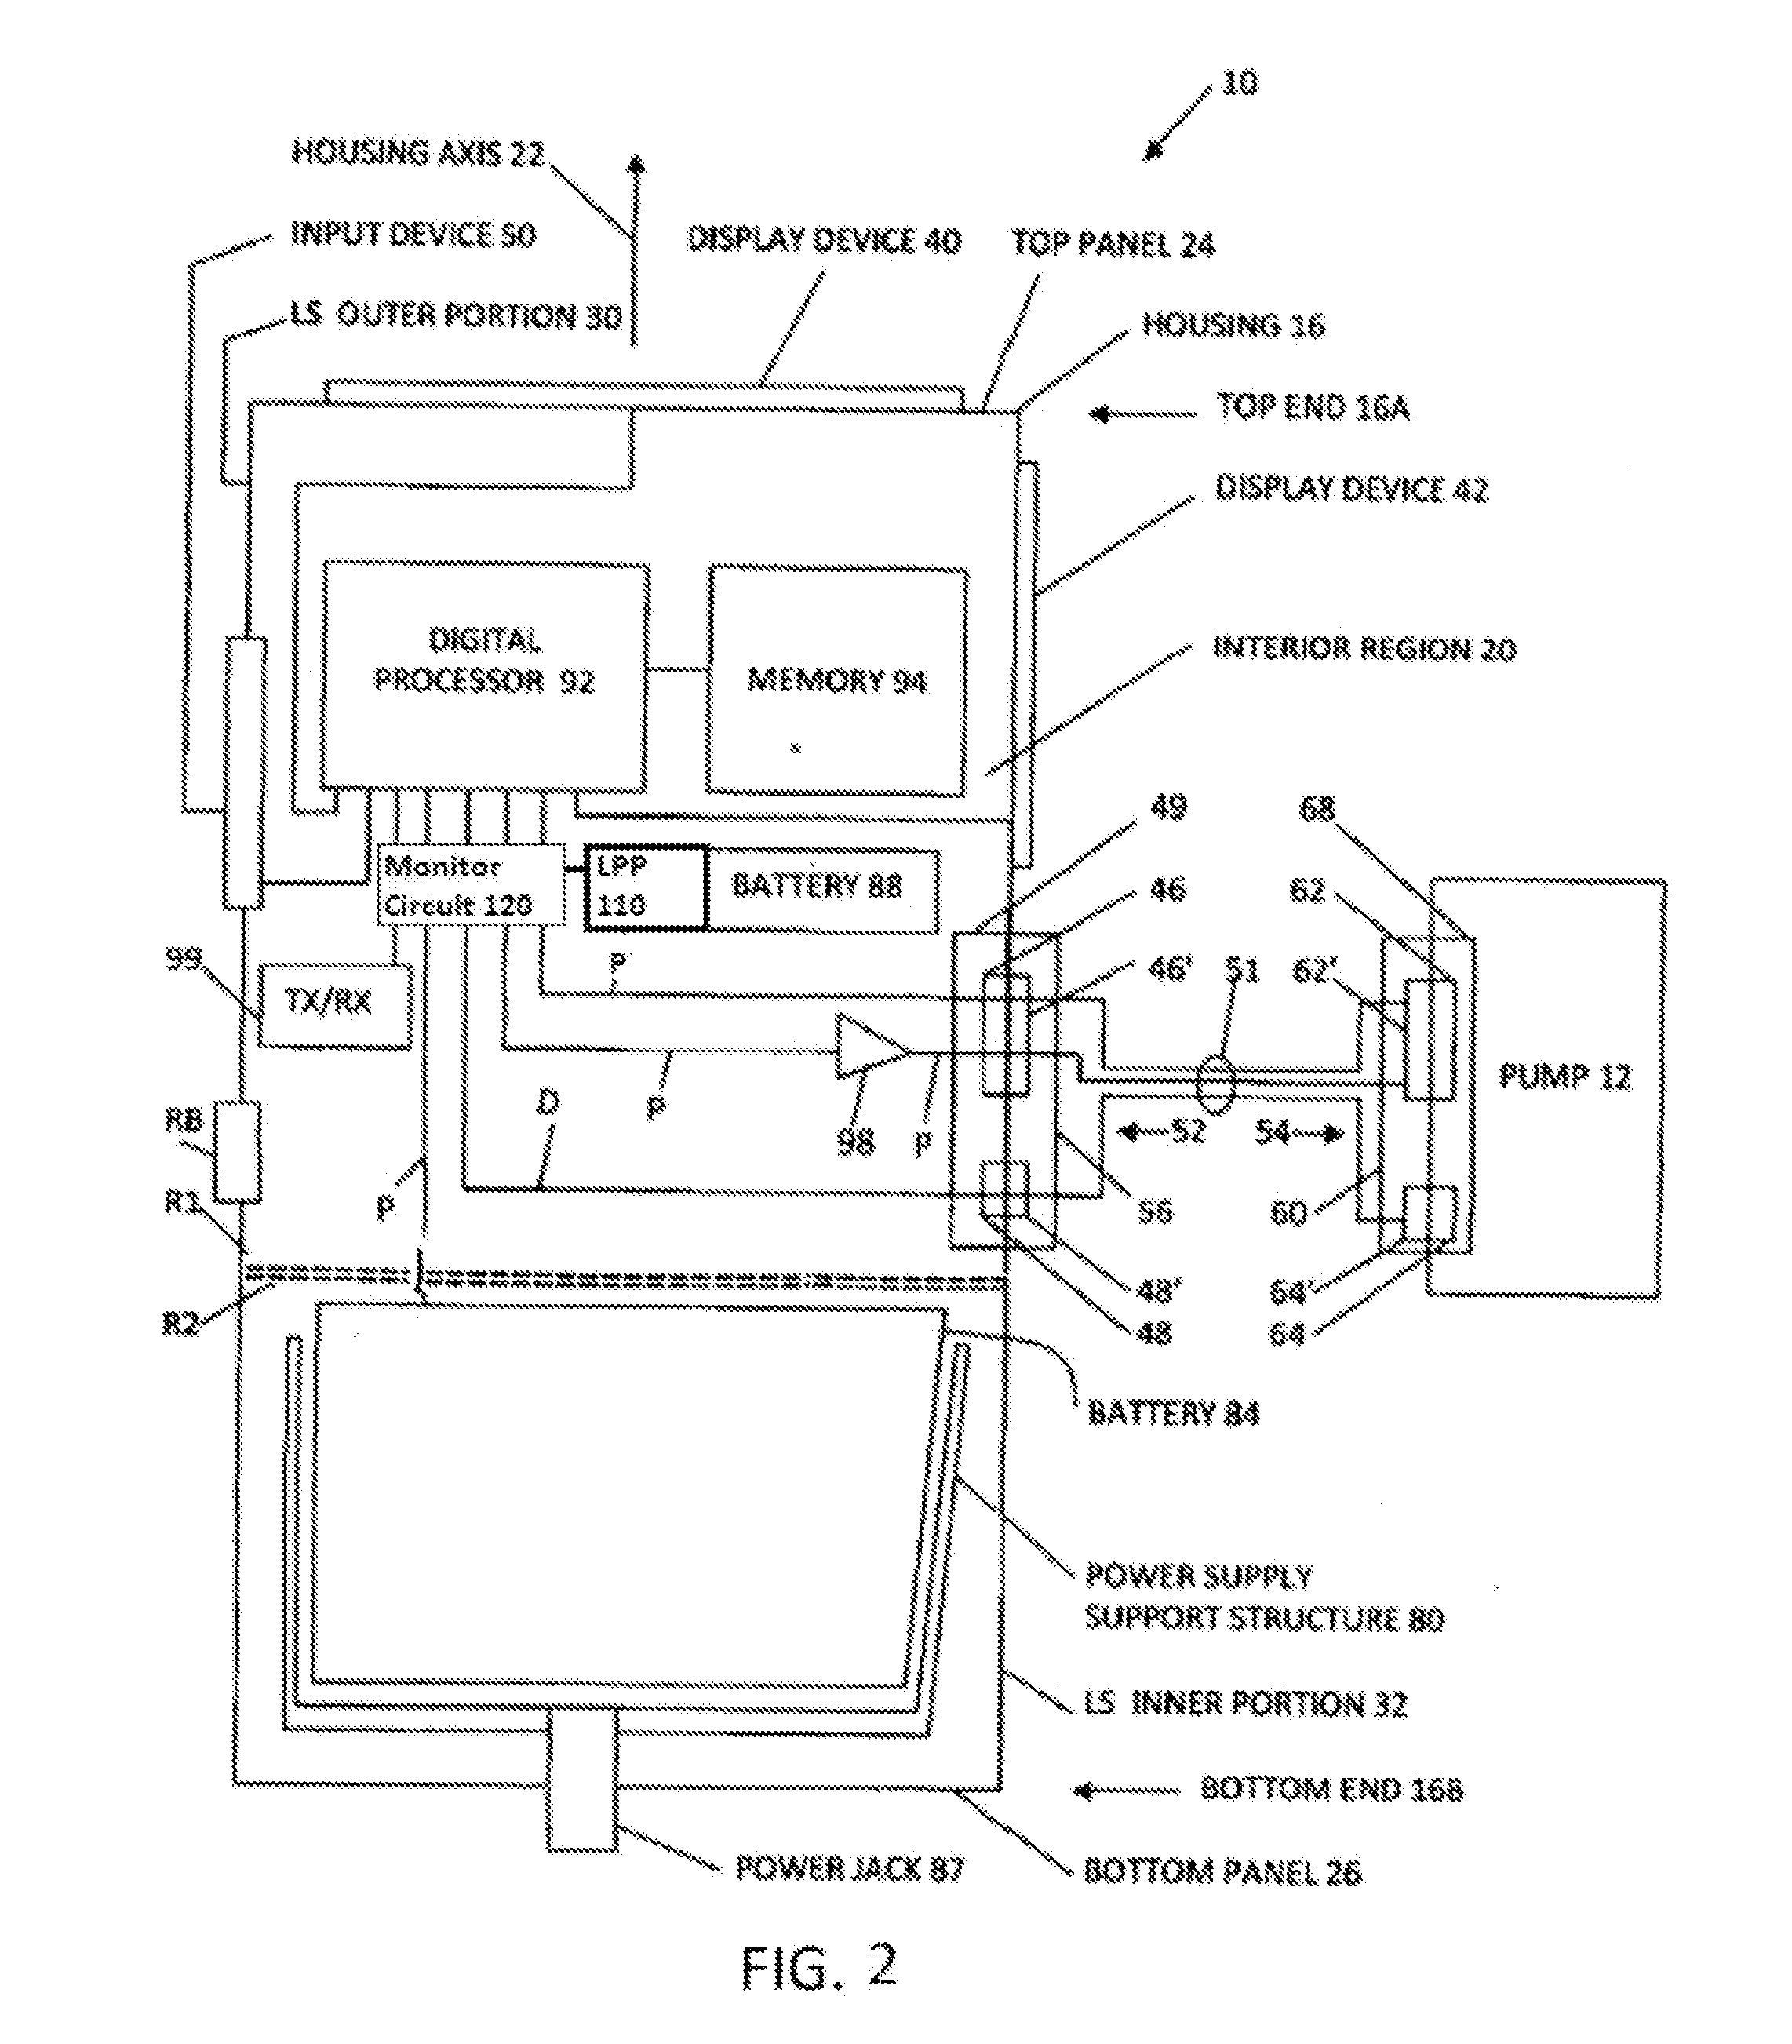 Low-power battery pack with safety system